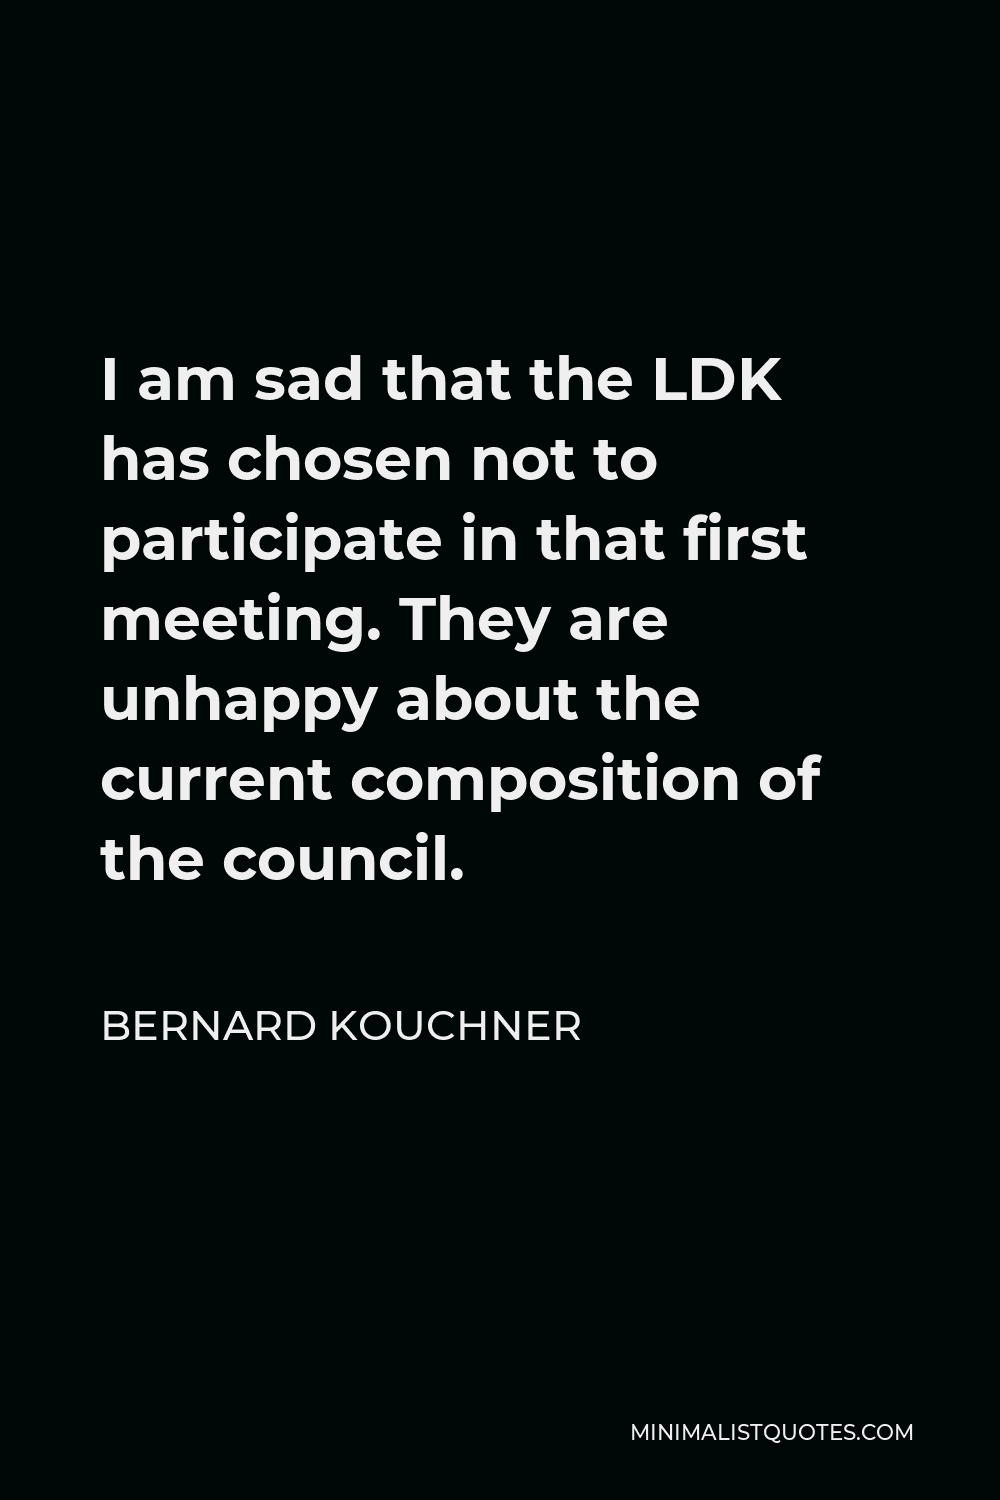 Bernard Kouchner Quote - I am sad that the LDK has chosen not to participate in that first meeting. They are unhappy about the current composition of the council.